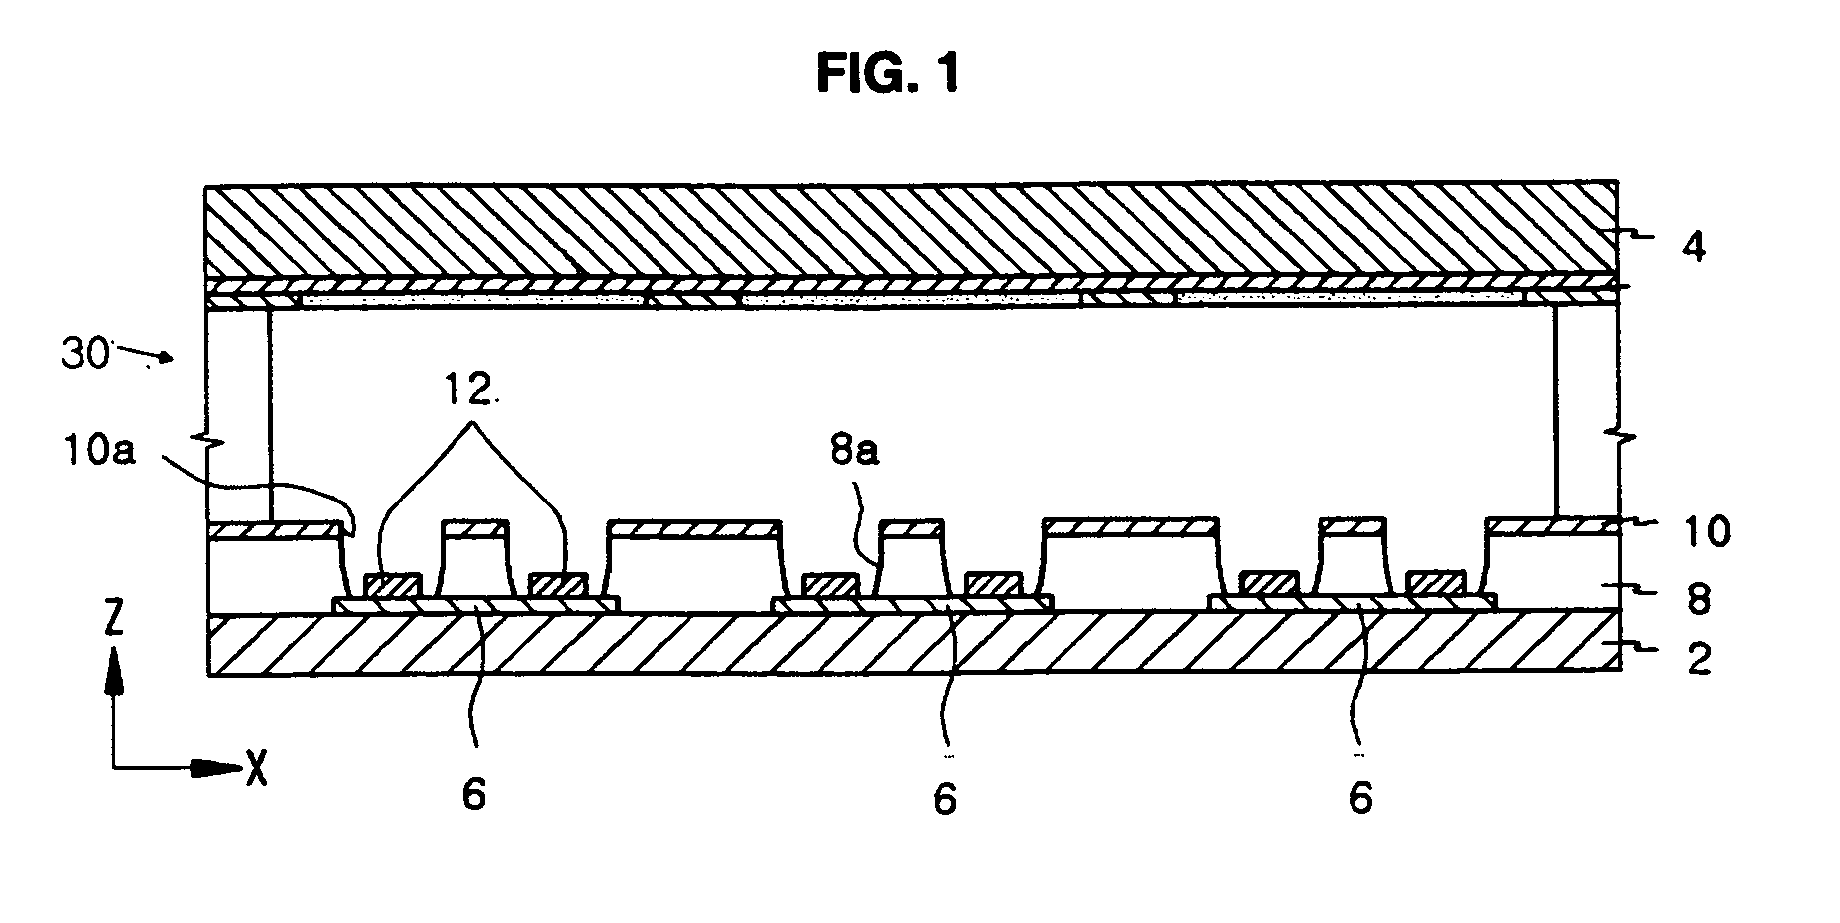 Composition for forming an electron emission source for use in an electron emission device and an electron emission source prepared therefrom